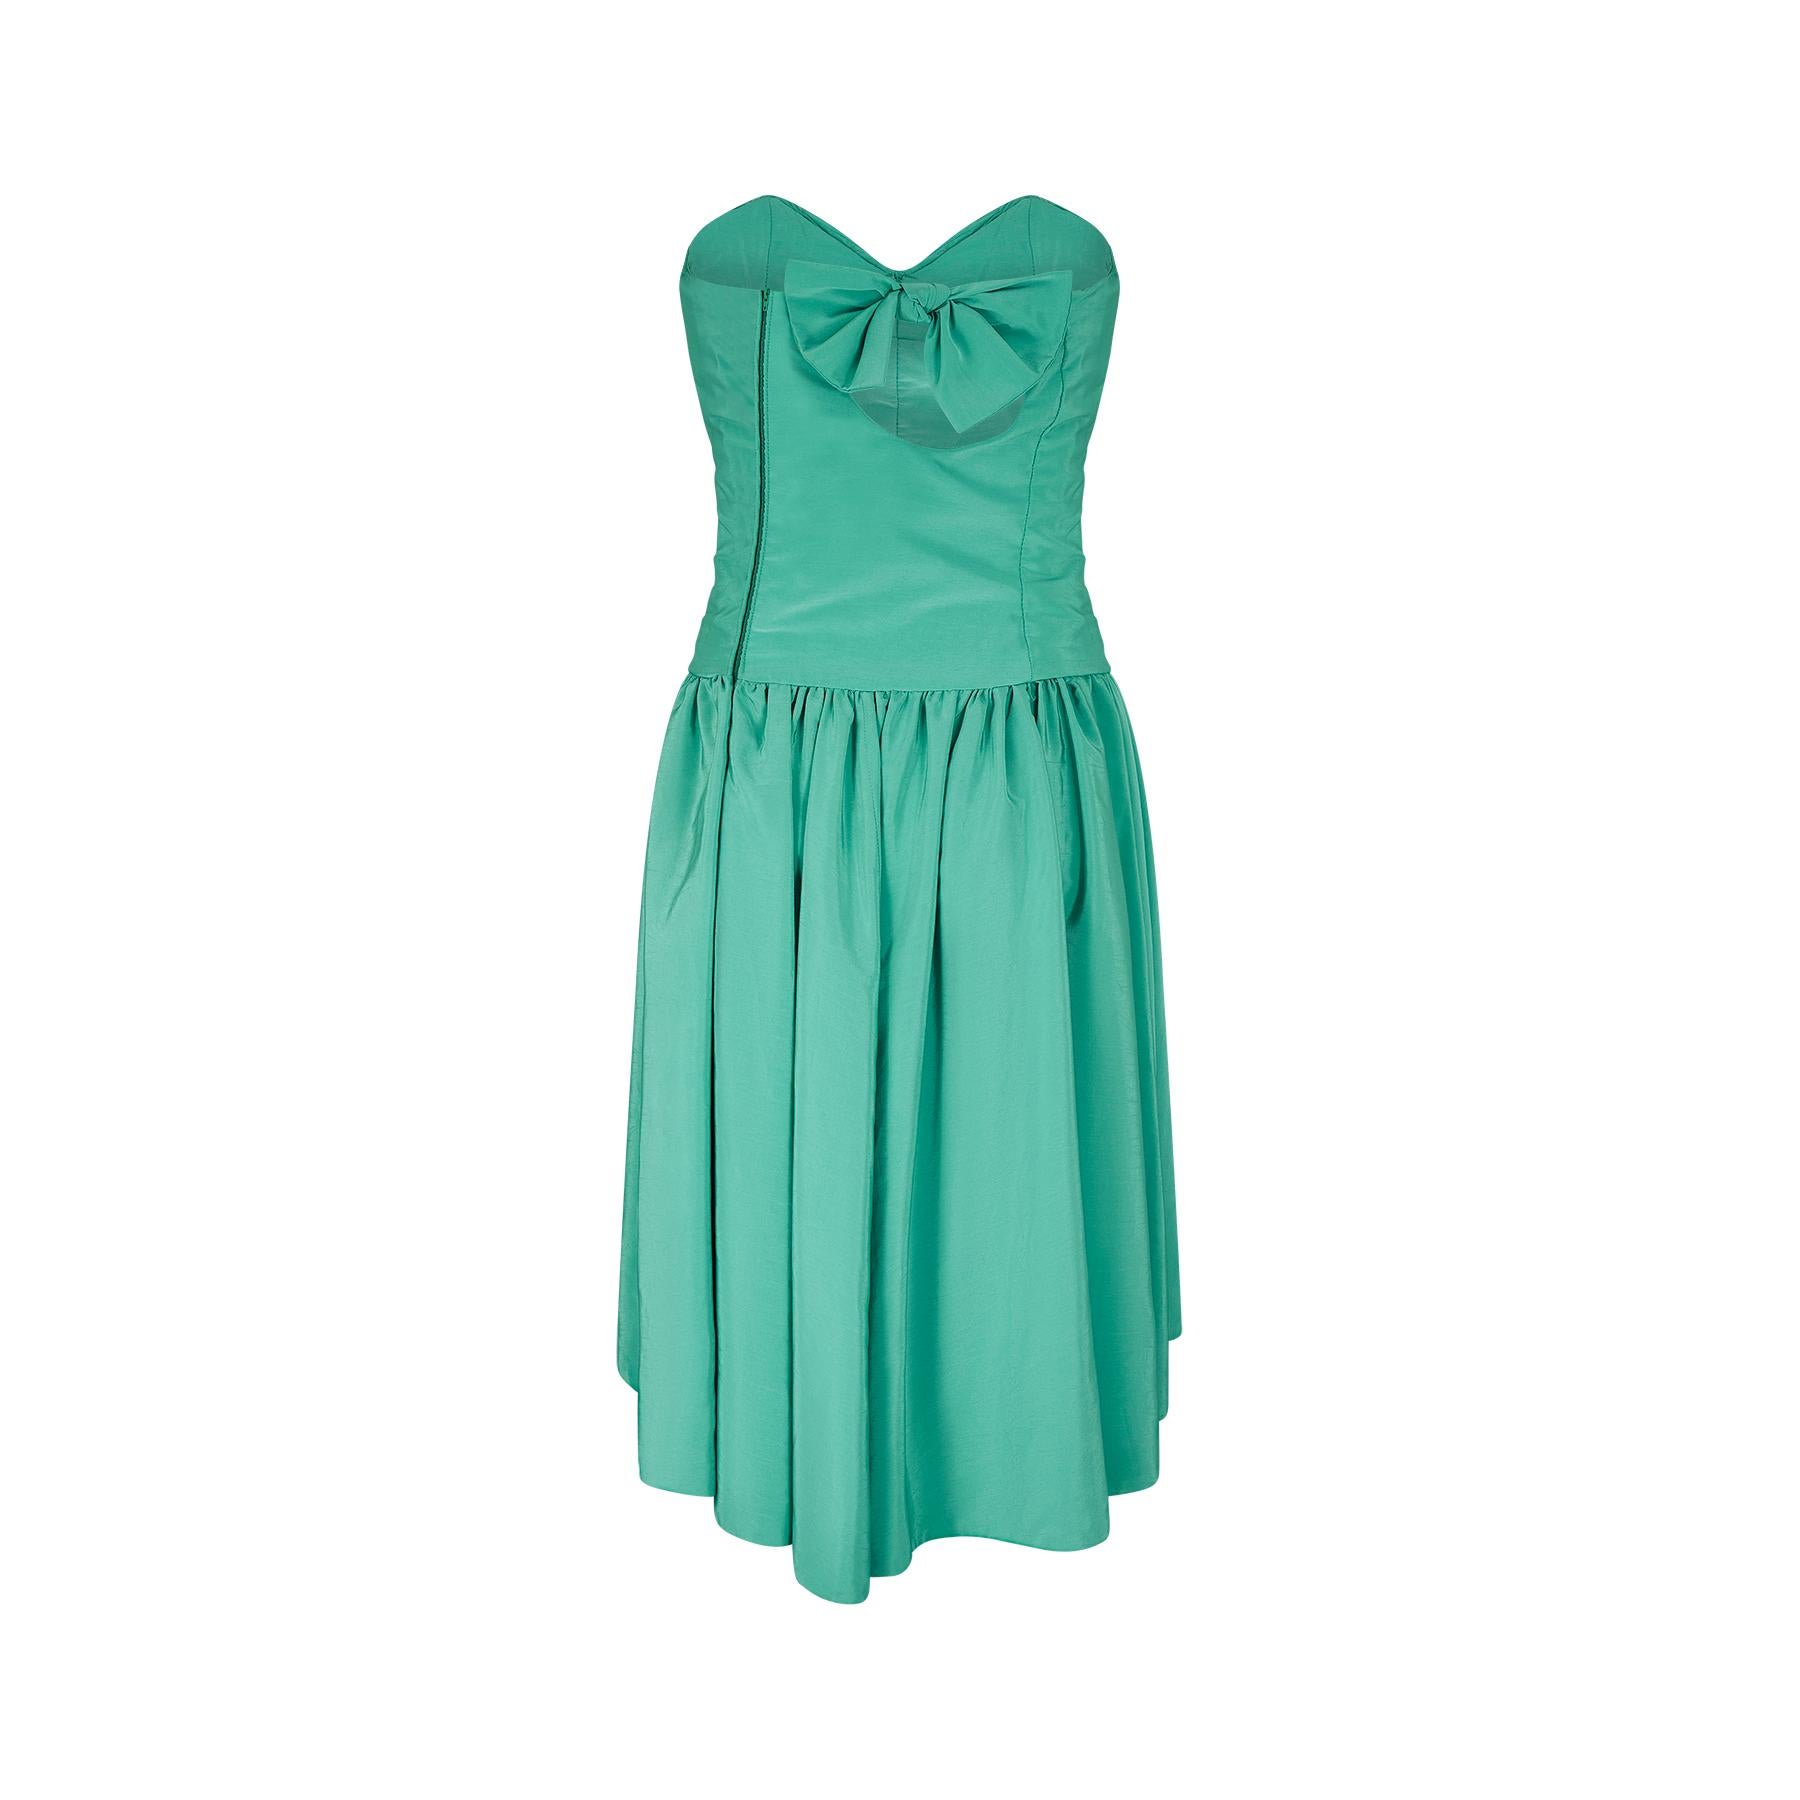 Stylish 1980s emerald green strapless dress by Bees Knees. The dress is exceptionally well made with the workmanship being at couture standards. We can only assume this was made by talented couture dressmaker, perhaps as a bespoke commission as